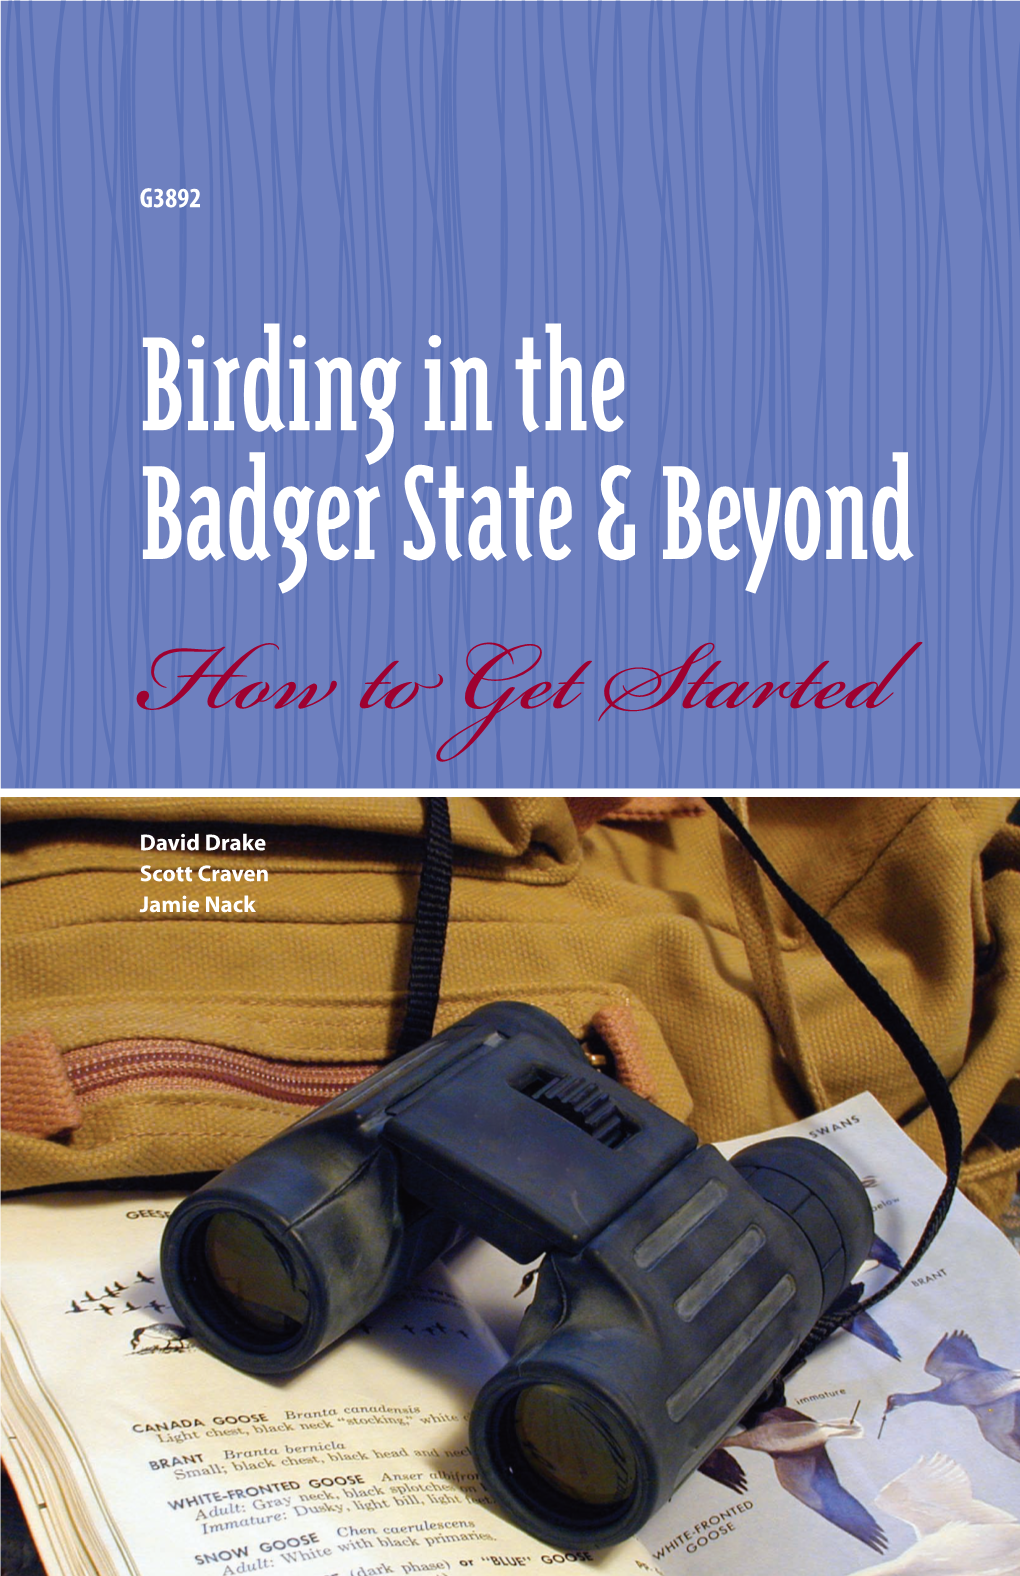 Birding in the Badger State and Beyond: How to Get Started (G3892) I-04-2010